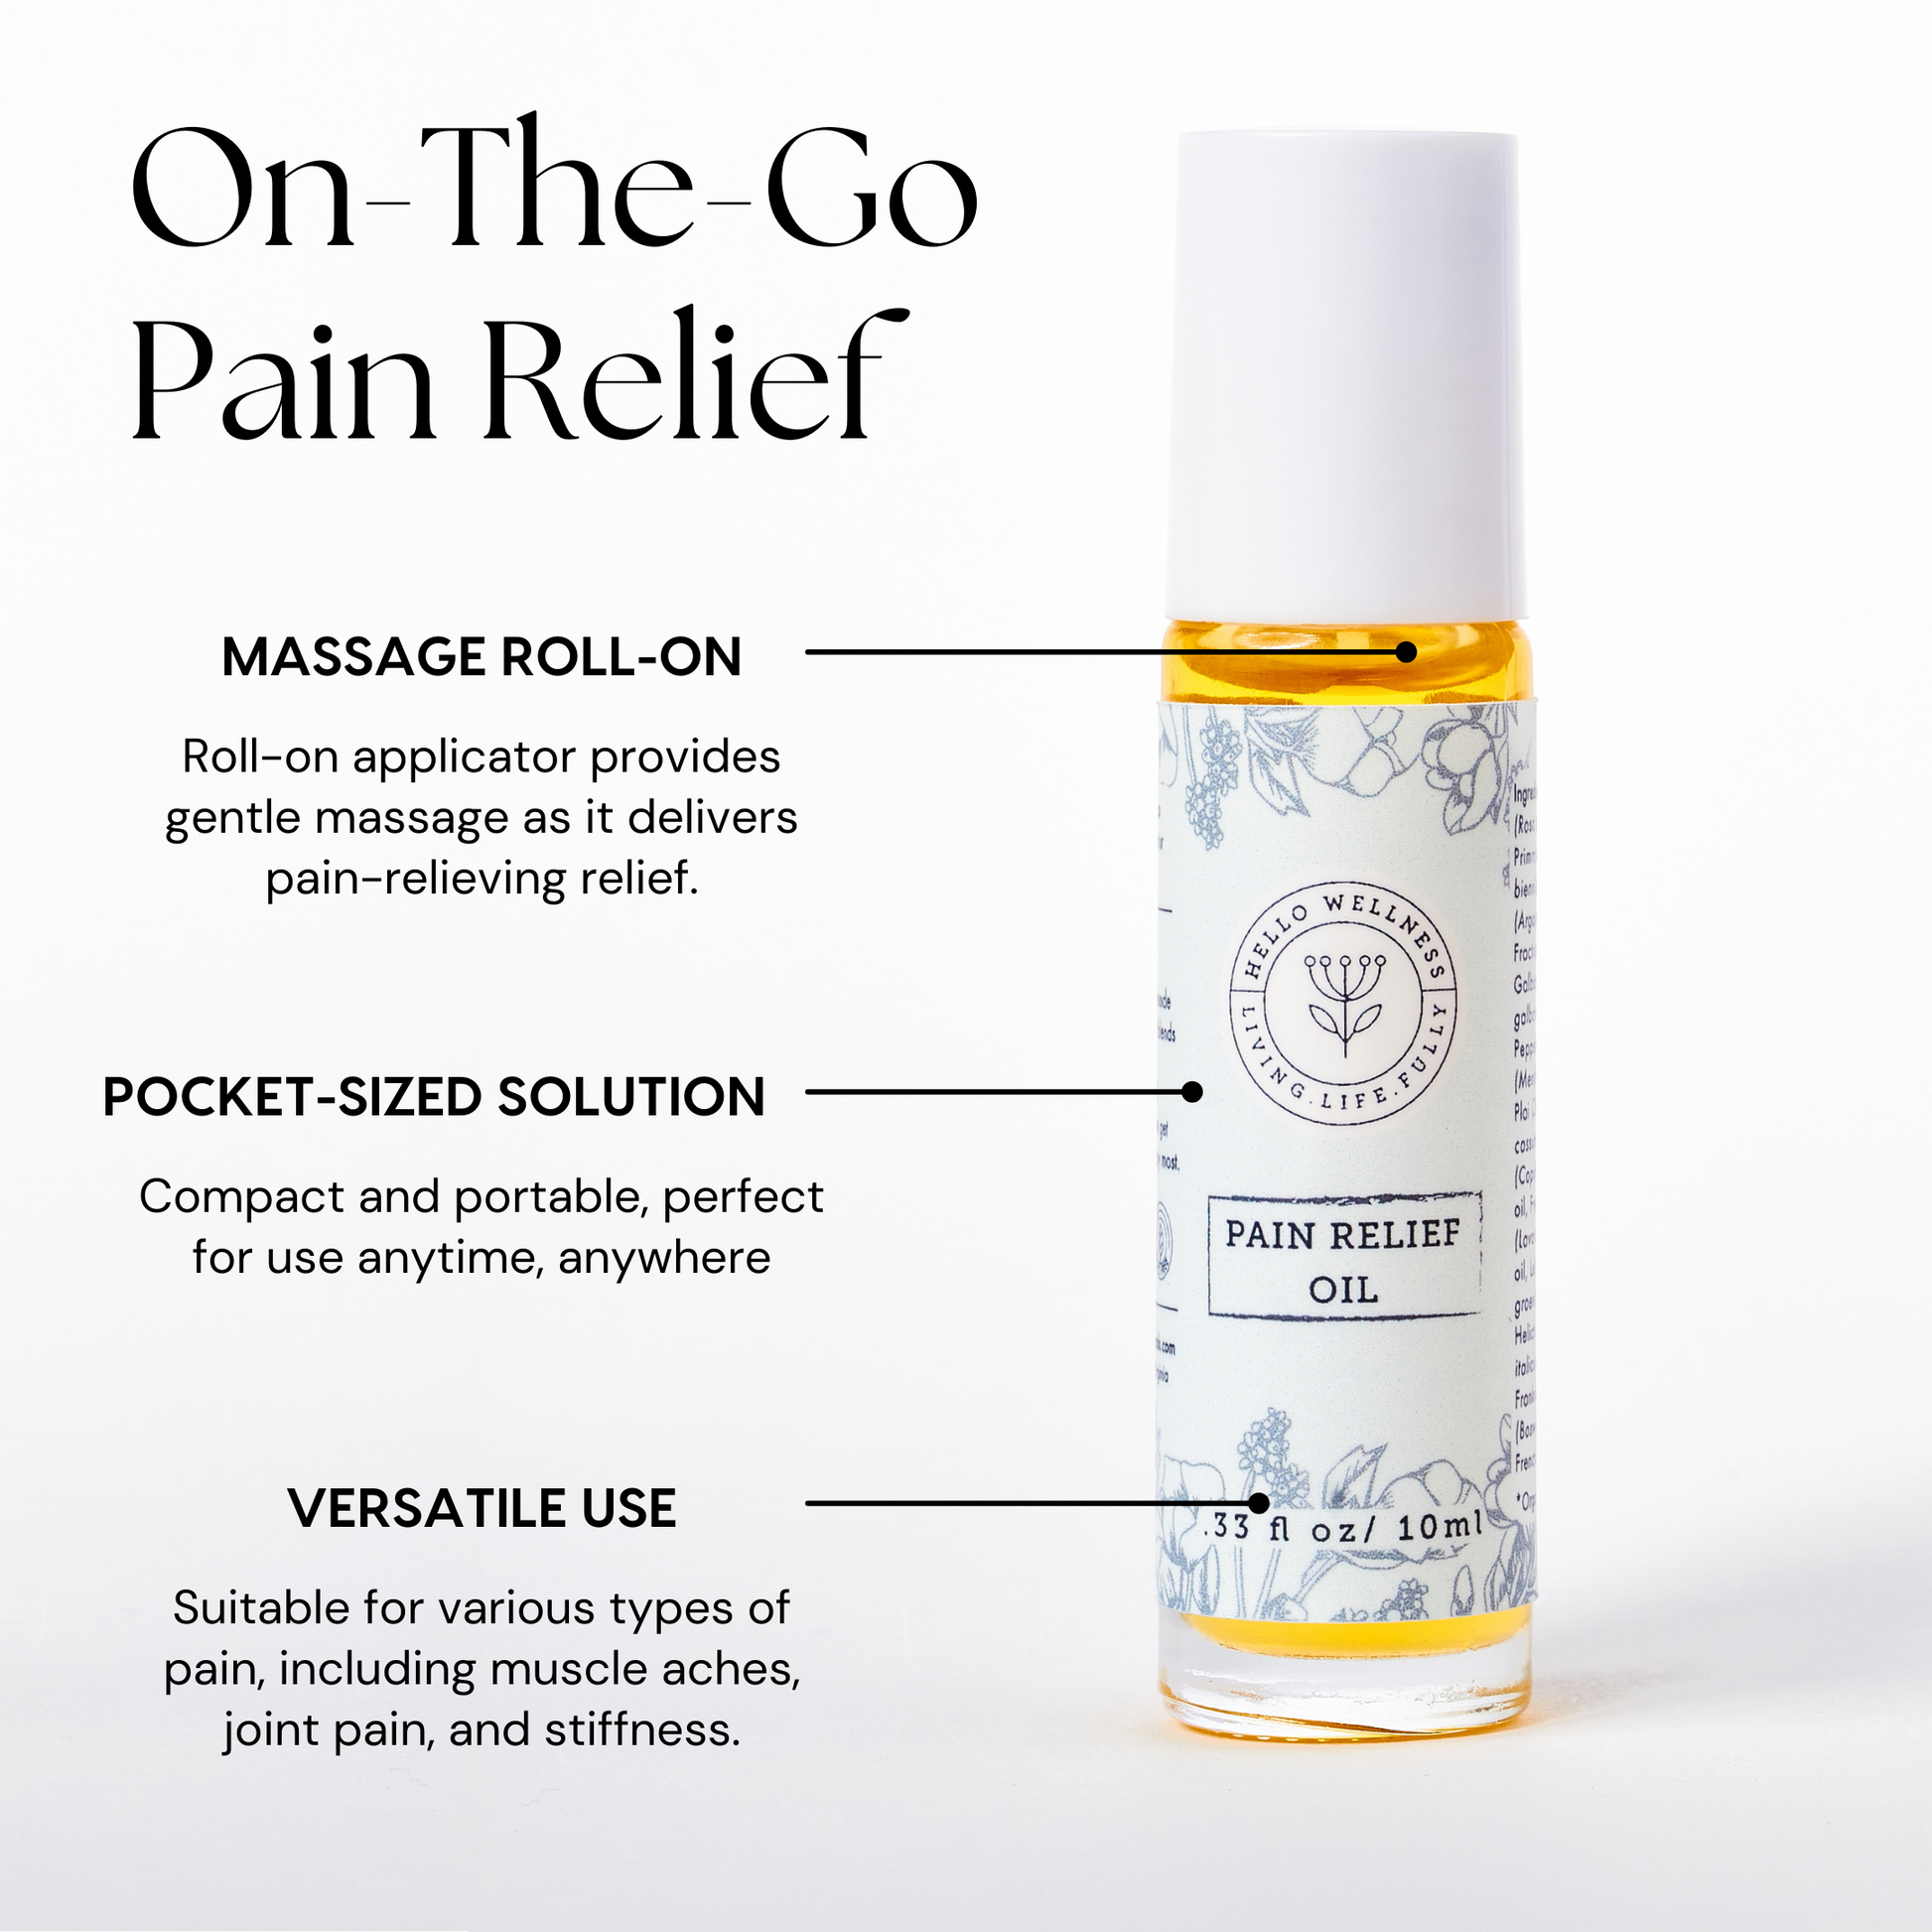 10 ml travel size Pain Relief Oil roll-on for on-the-go pain relief of muscle, joint, & body pain.  Hello Wellness